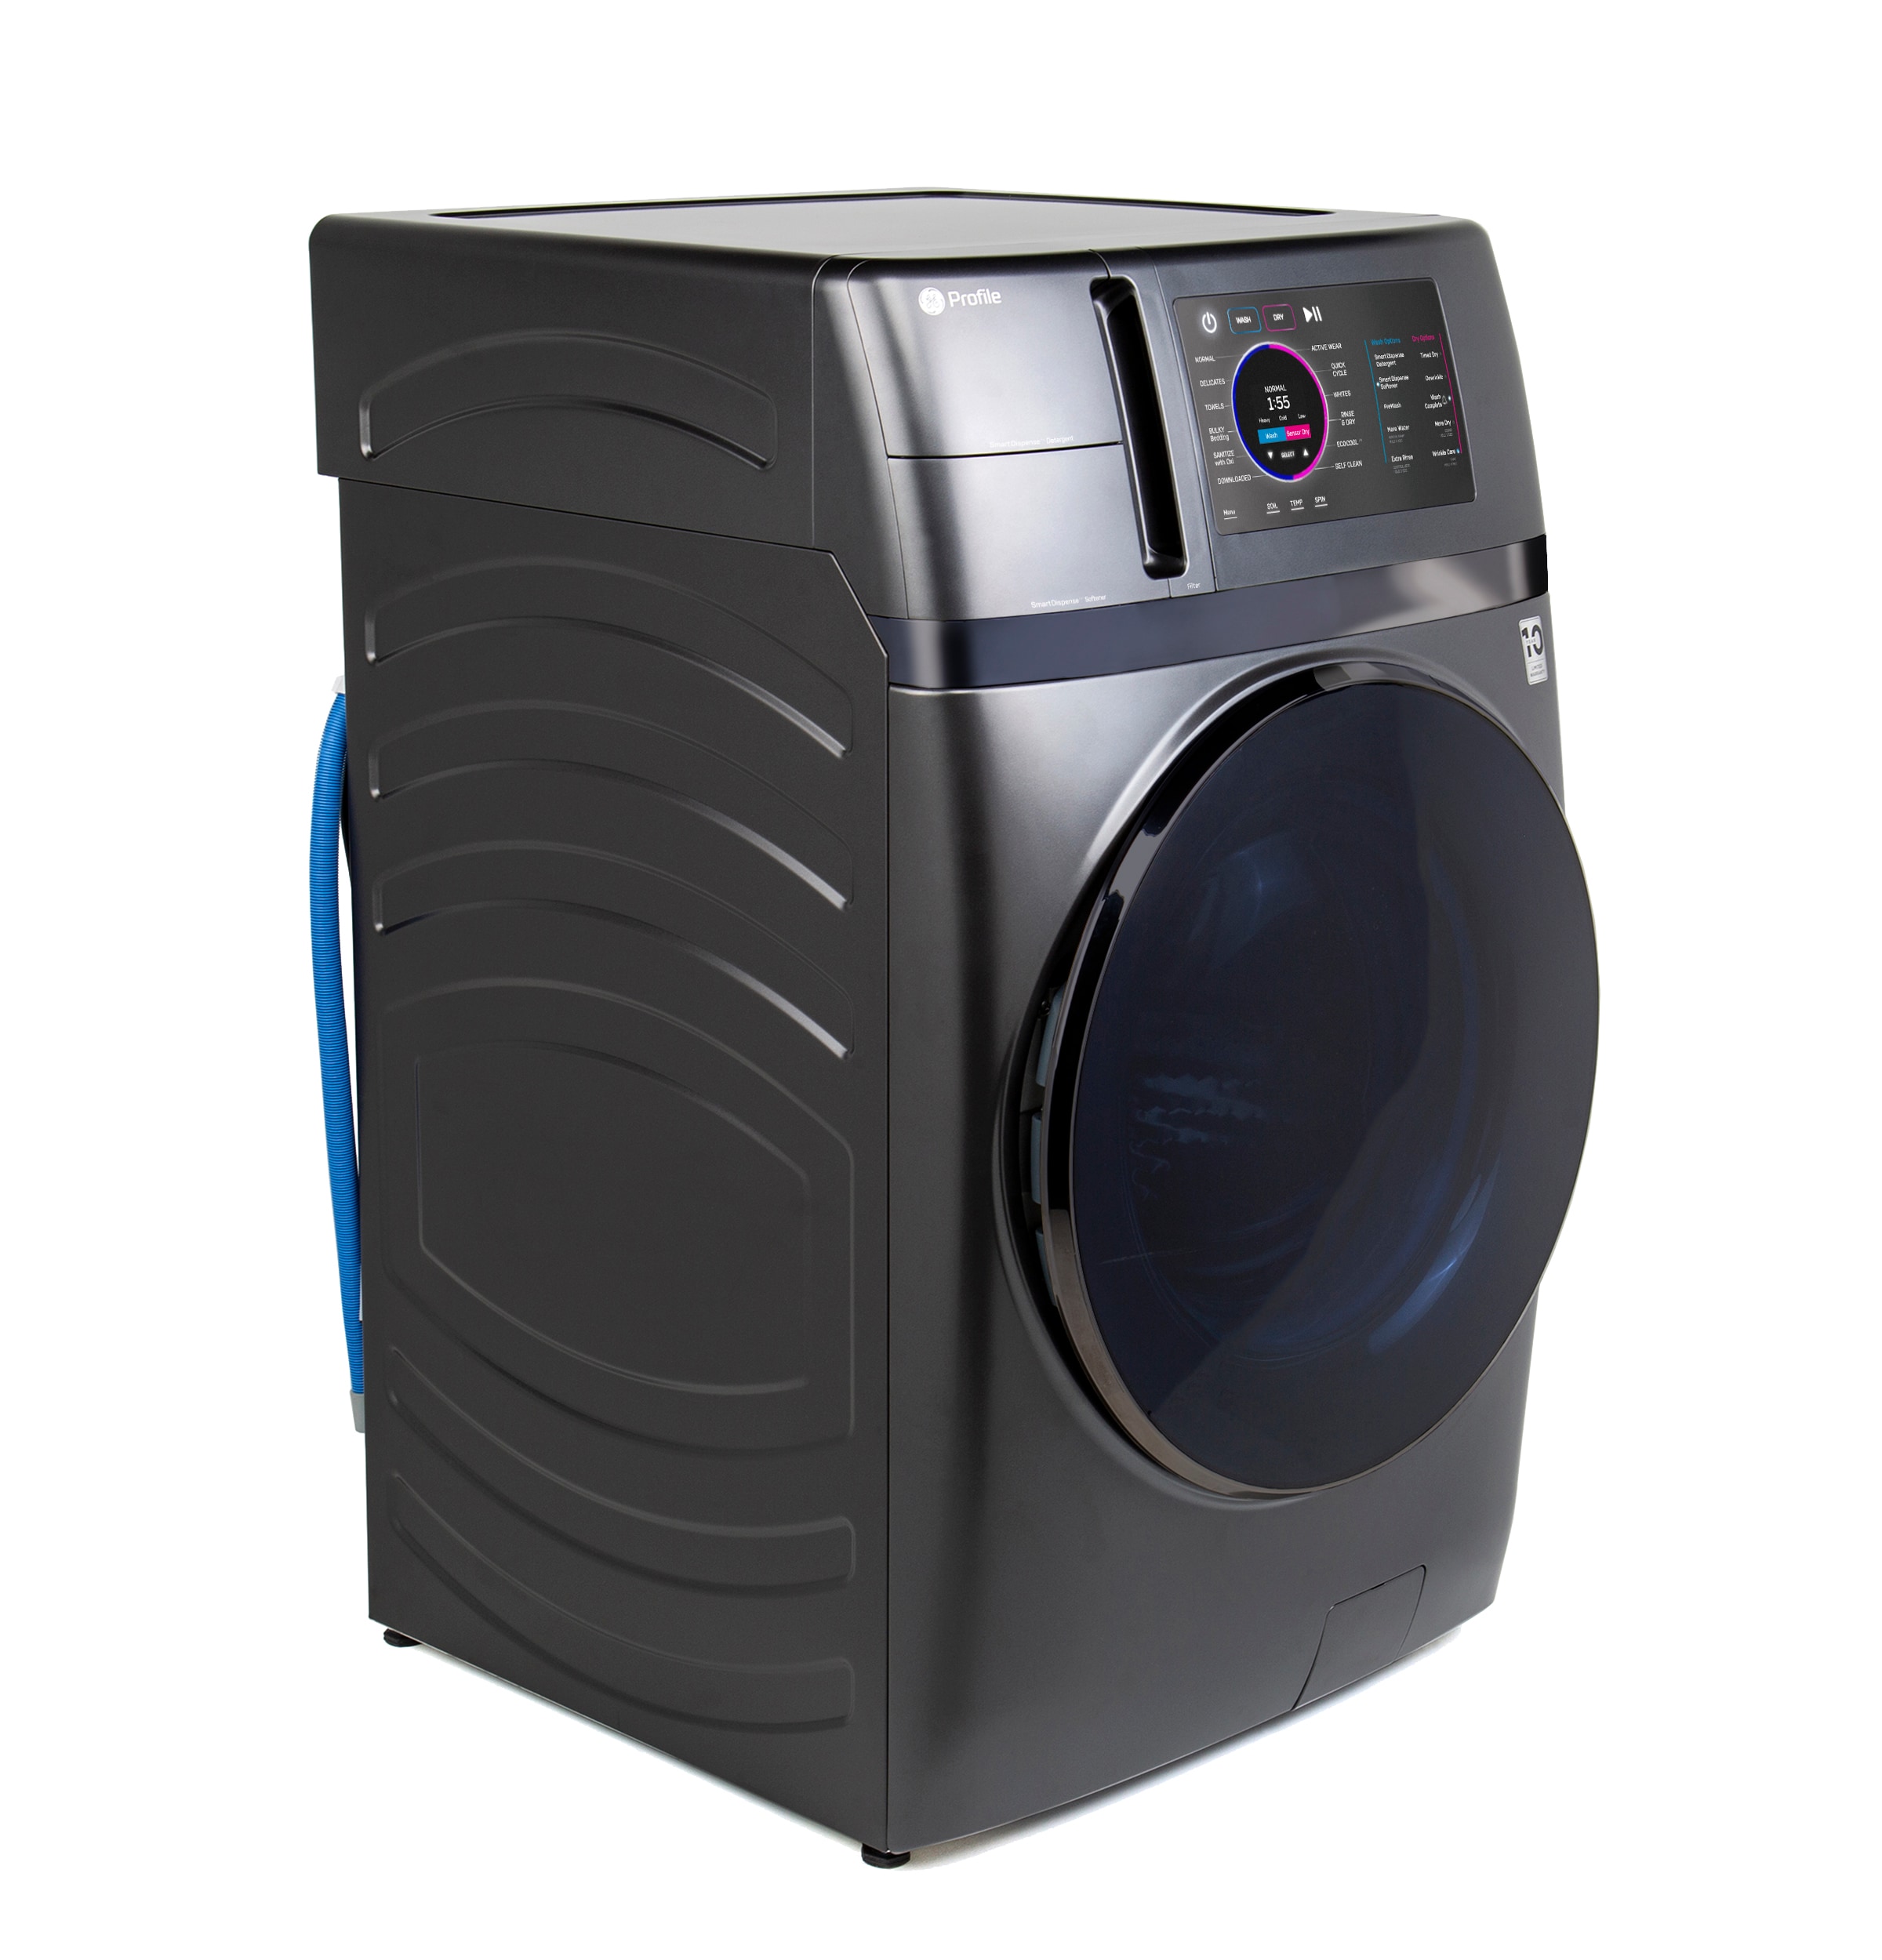 Does the GE Profile All-in-One Washer Dryer Live Up to the Hype?, Urner's